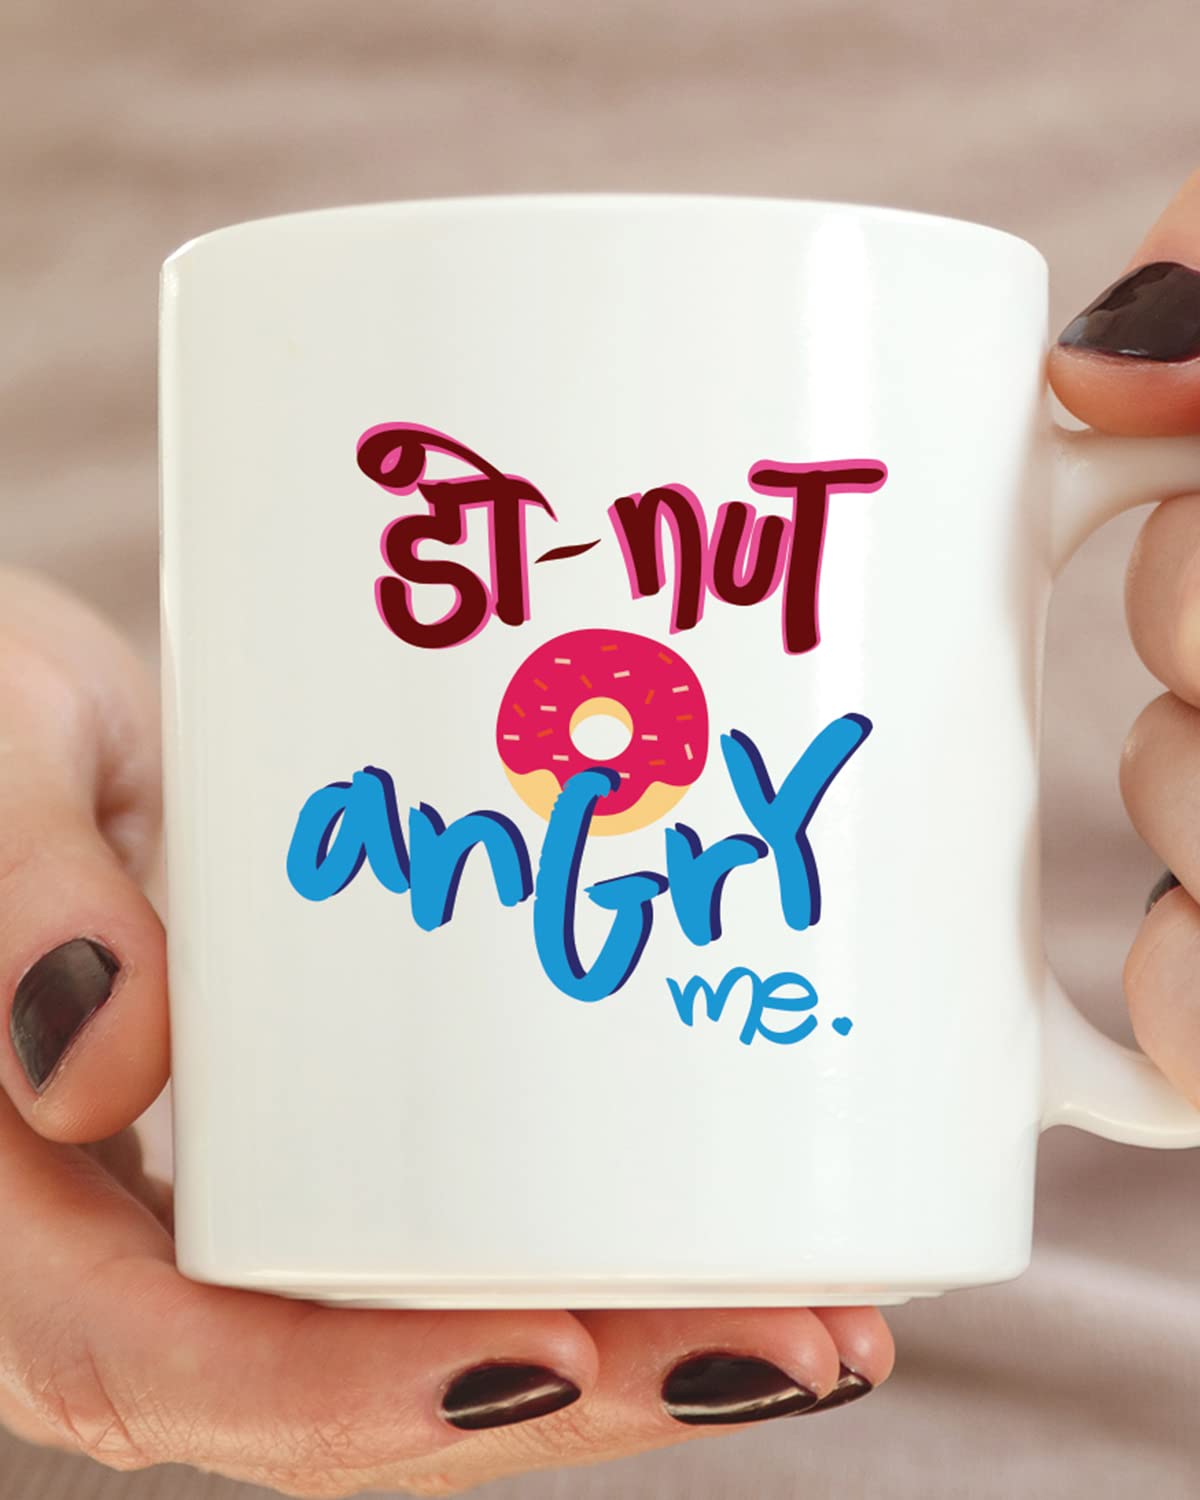 Donut Angry MECoffee Mug - Birthday Gift, Motivational Mug, Printed with Inspiring Quotes, Positivity Mug, Inspirational Gift for Him & Her, Best Friend Gift, Gifts for Her, Cheer Up Gift